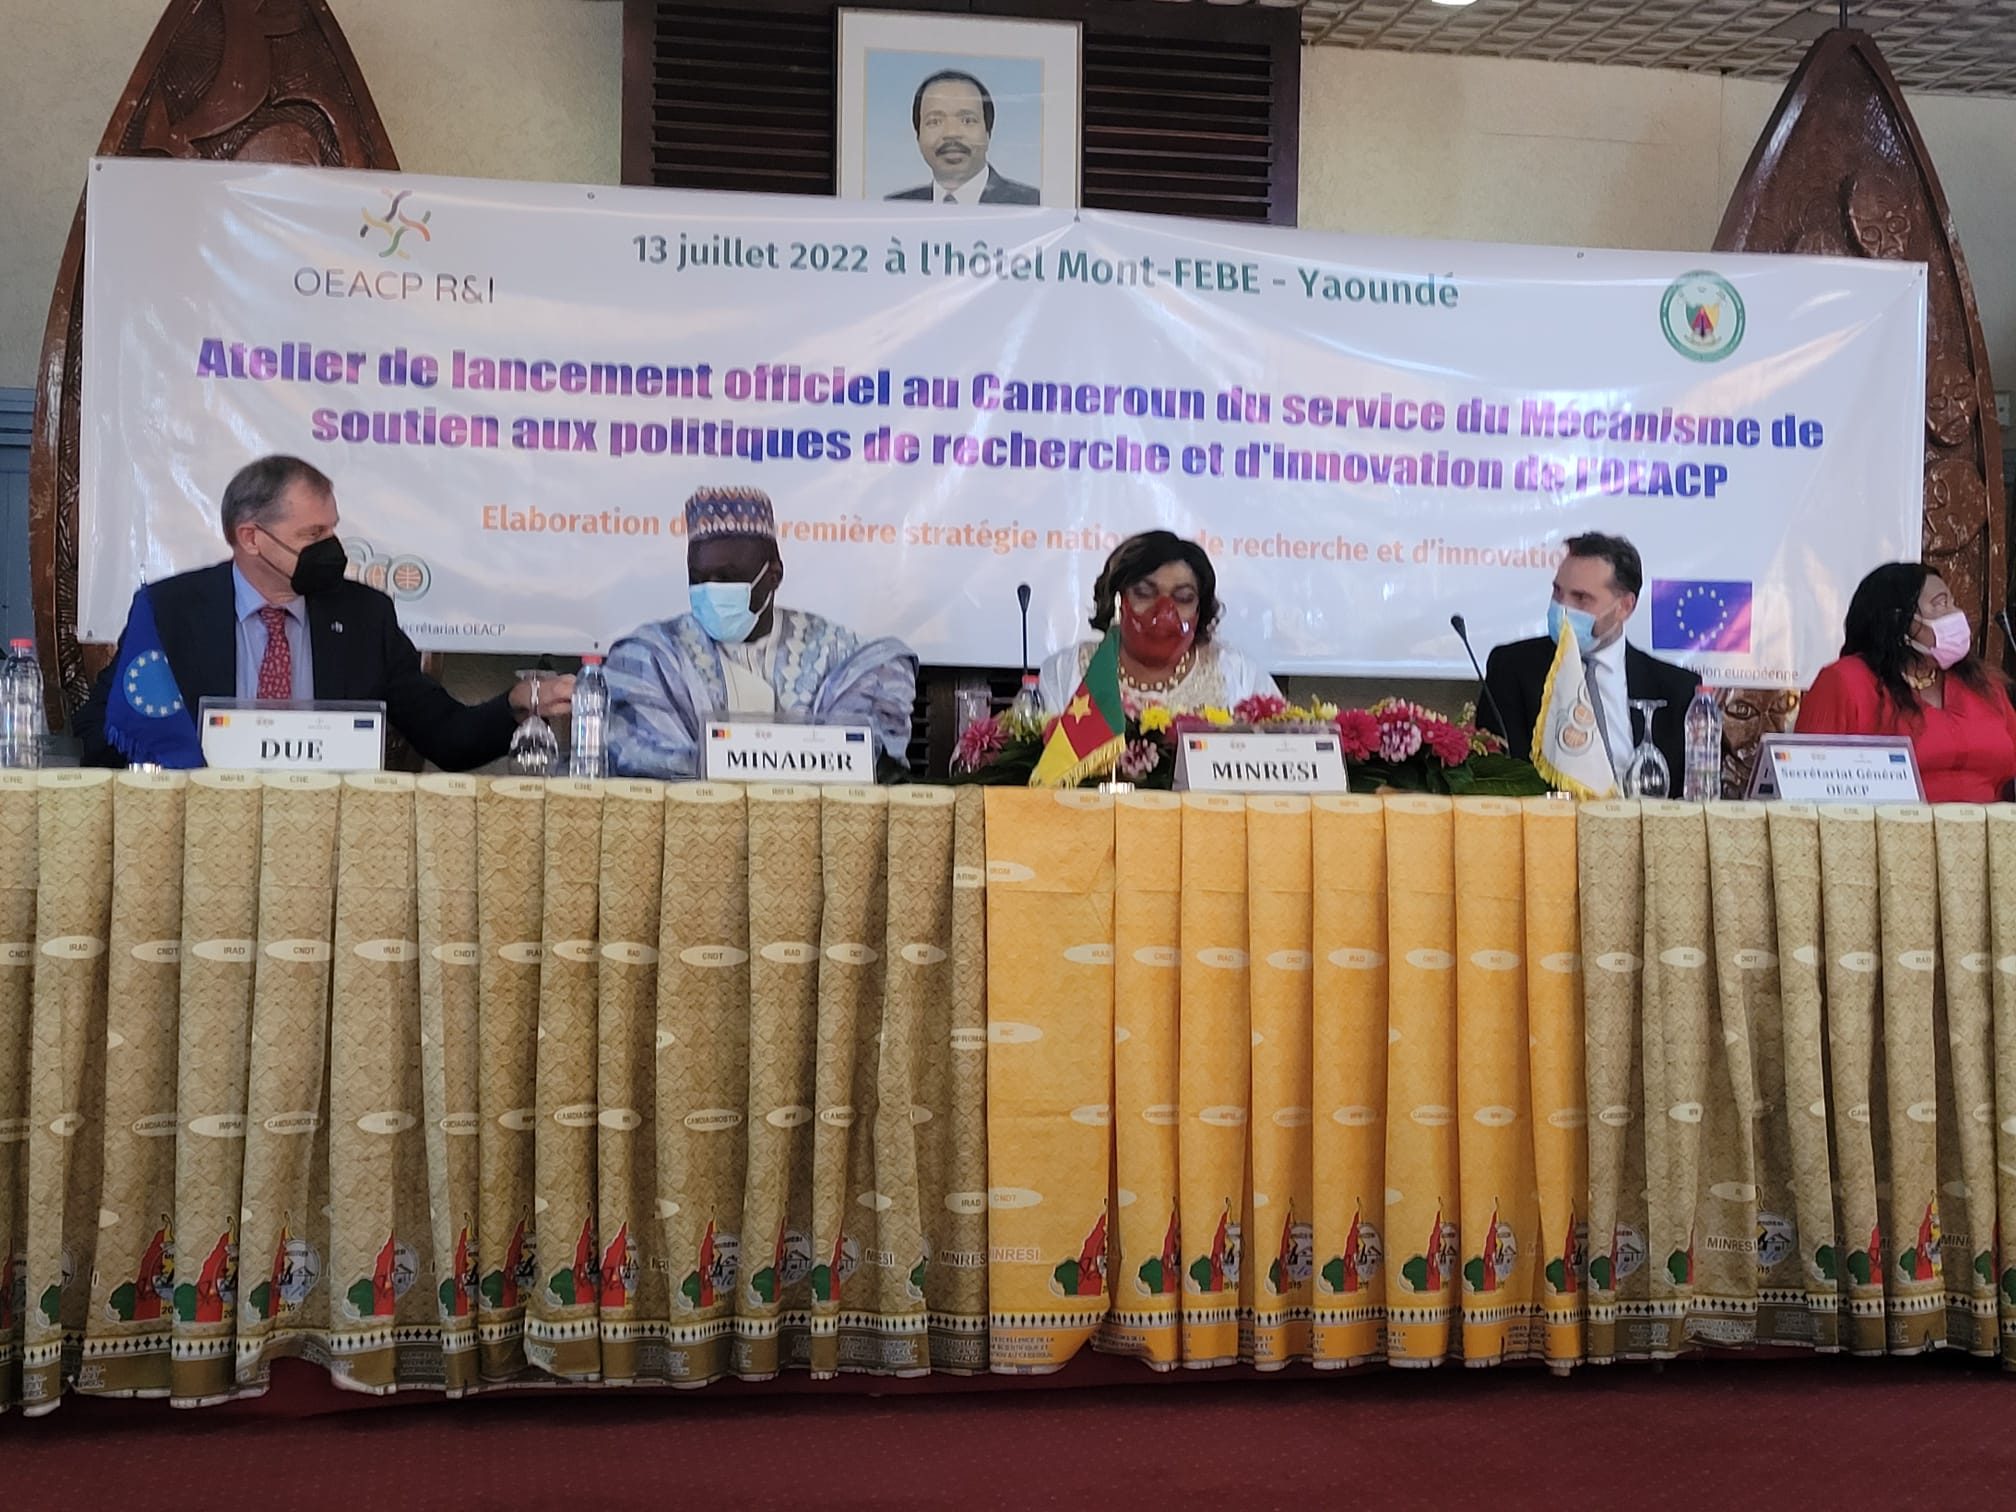 Official launch of the PSF service in Cameroon for the development of a national research and innovation strategy